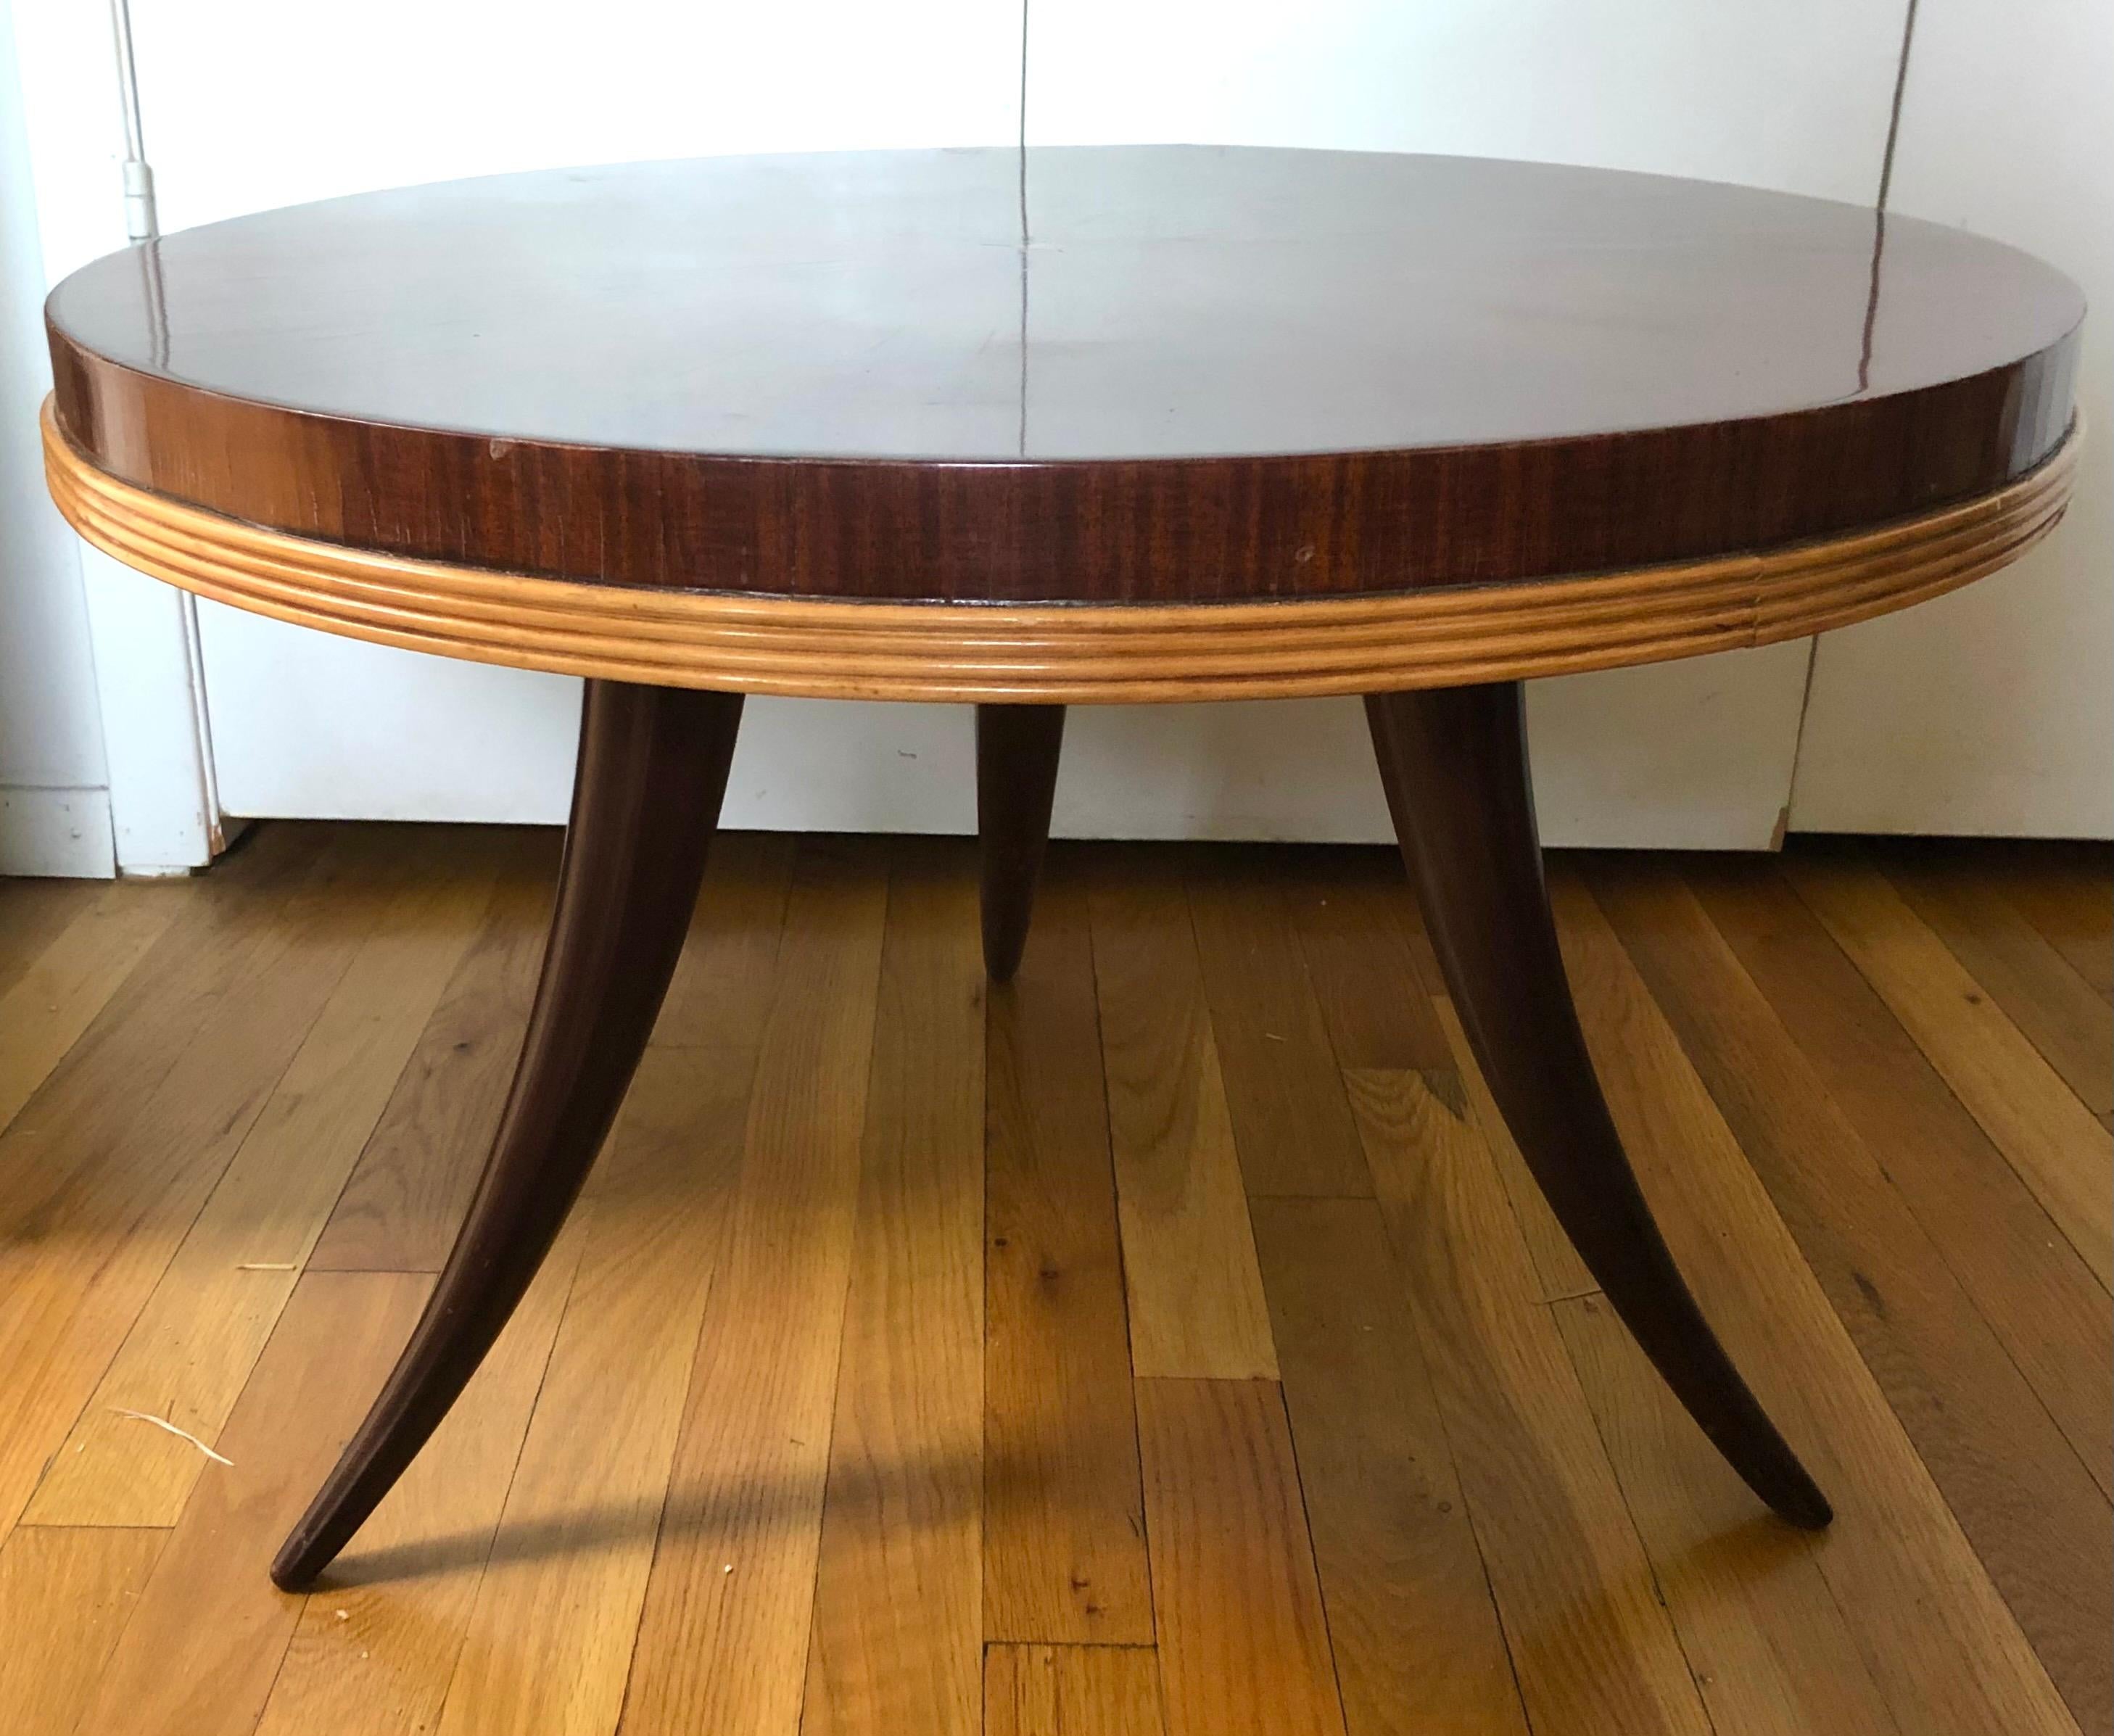 c. 1950, mahogany, ash, fruitwood, the round top clad in starburst pattern mahogany veneer with central brass star inlay, over three round tapered and sharply sabered legs, with channeled ash banding around frieze. Unlabeled but beautiful quality